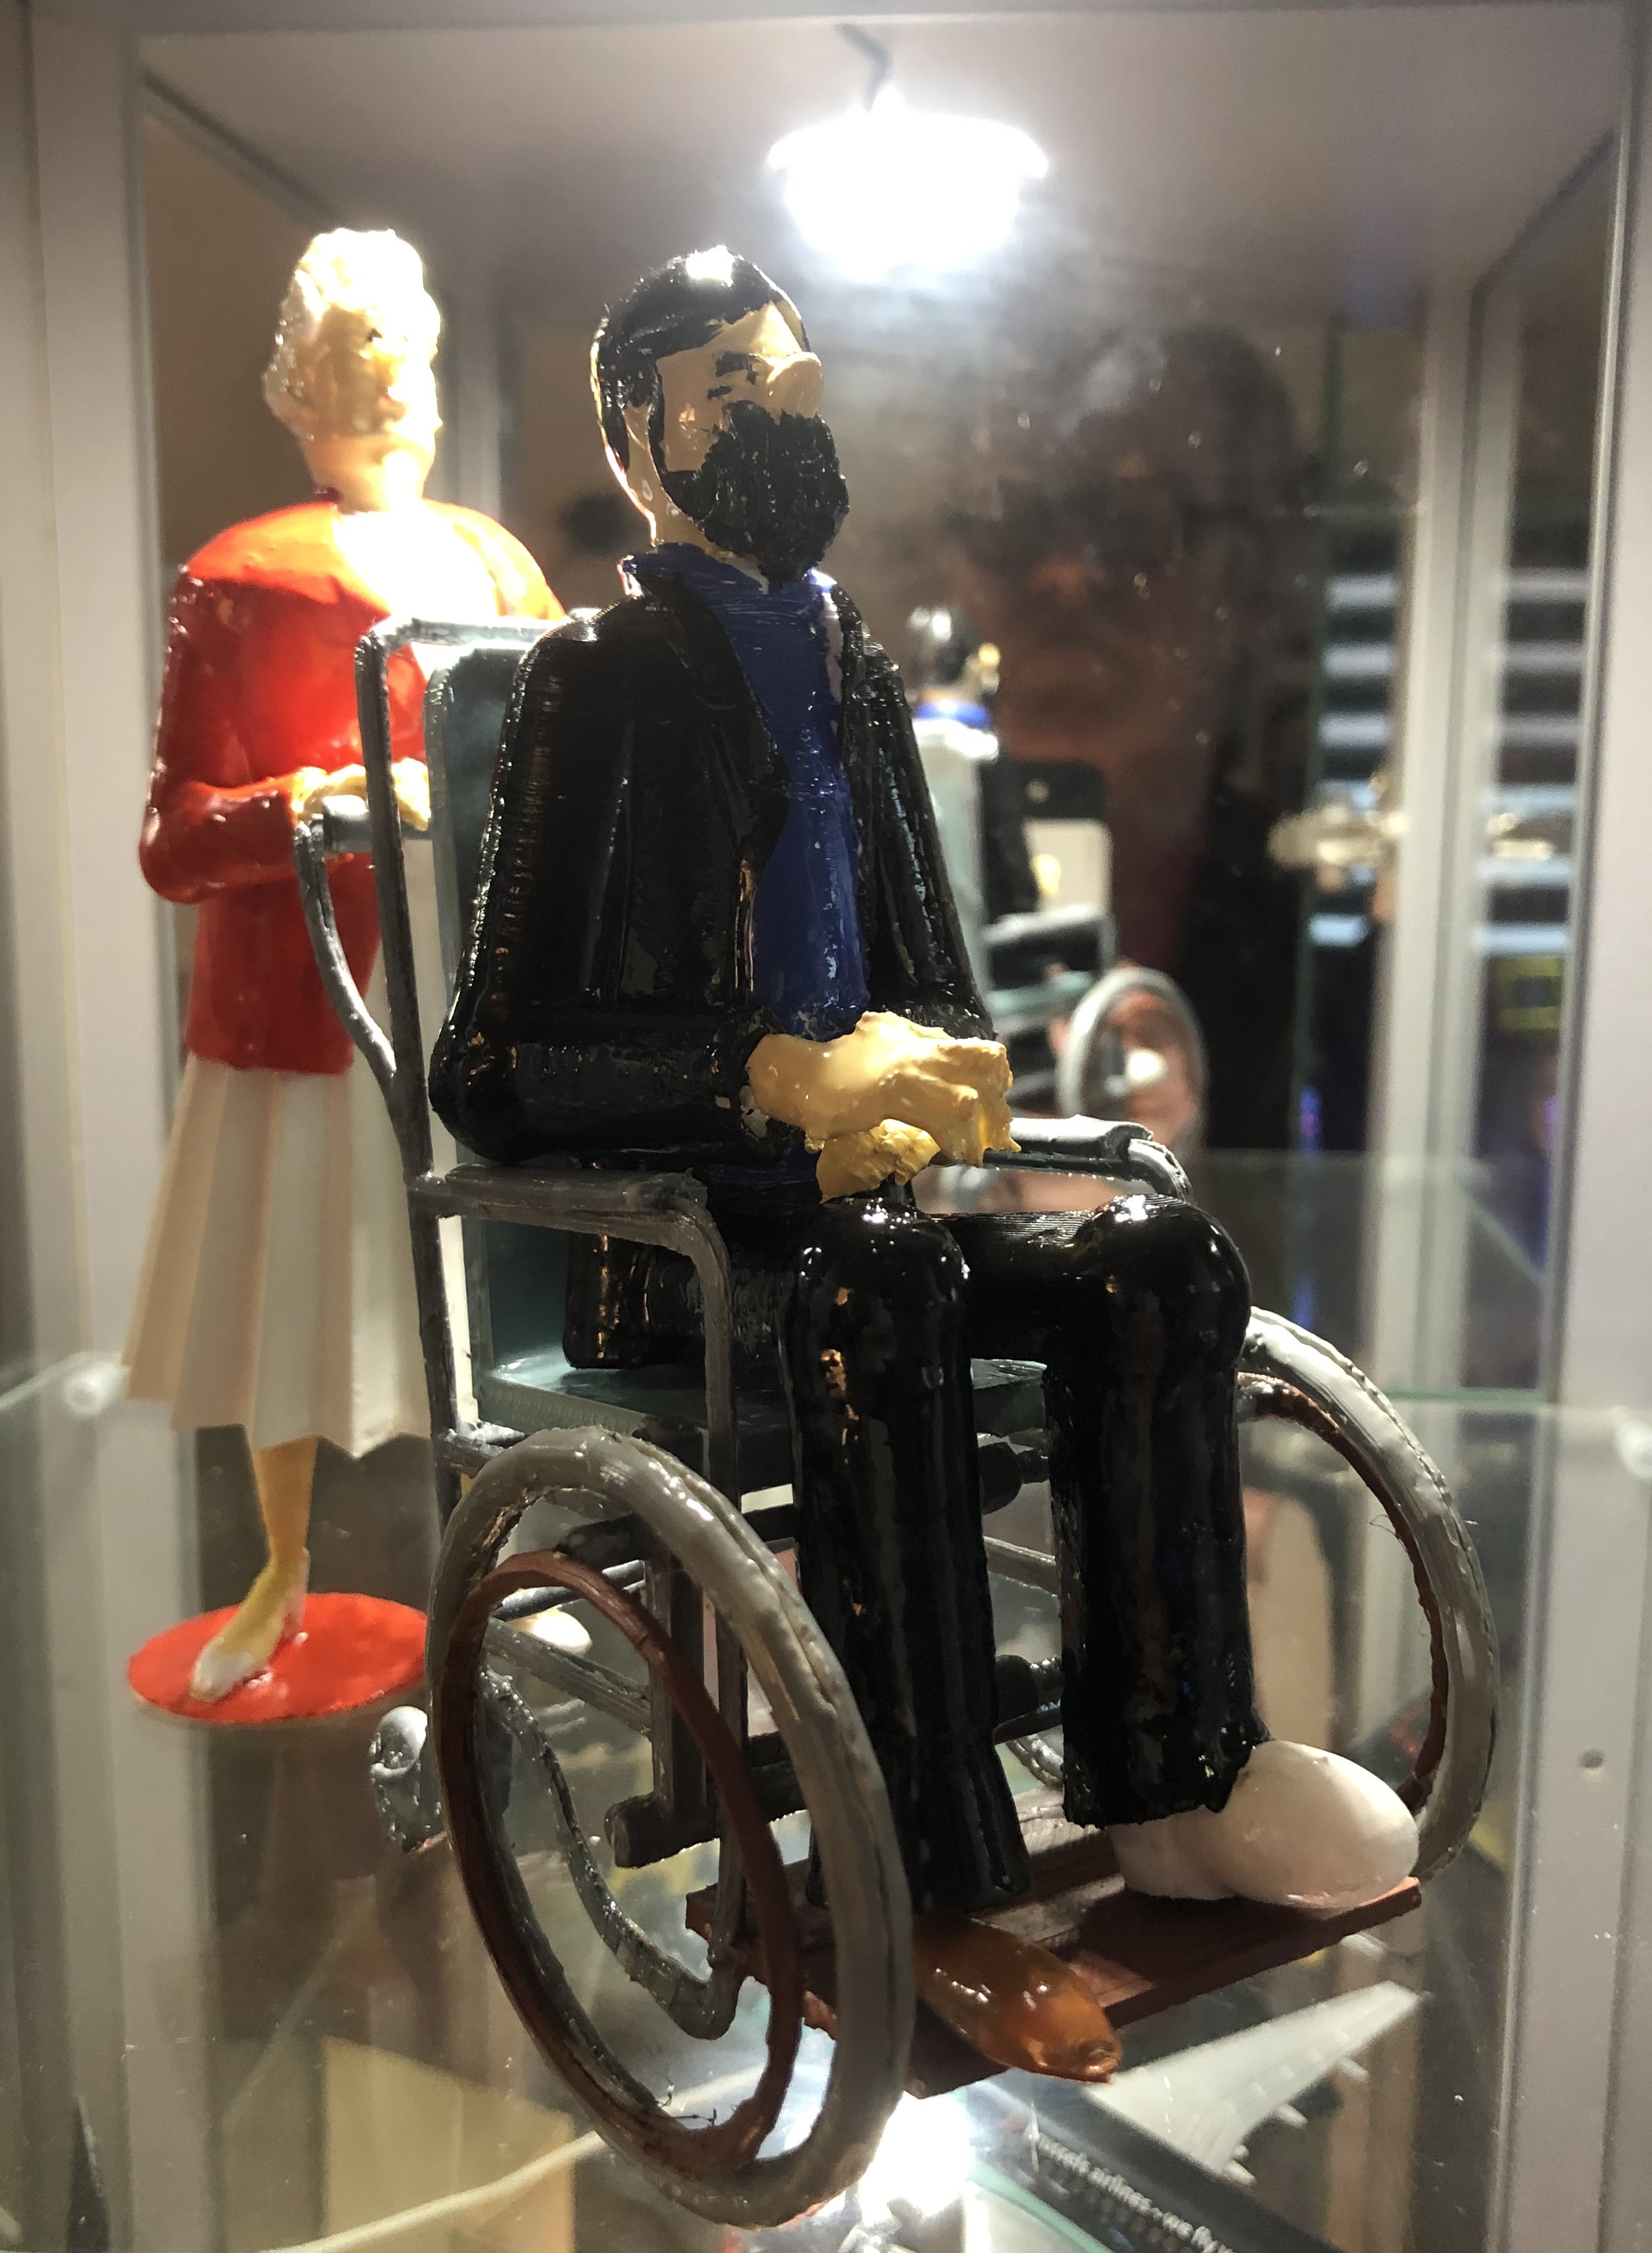 CAPTAIN HADDOCK IN A WHEELCHAIR, PUSHED BY BIANCA